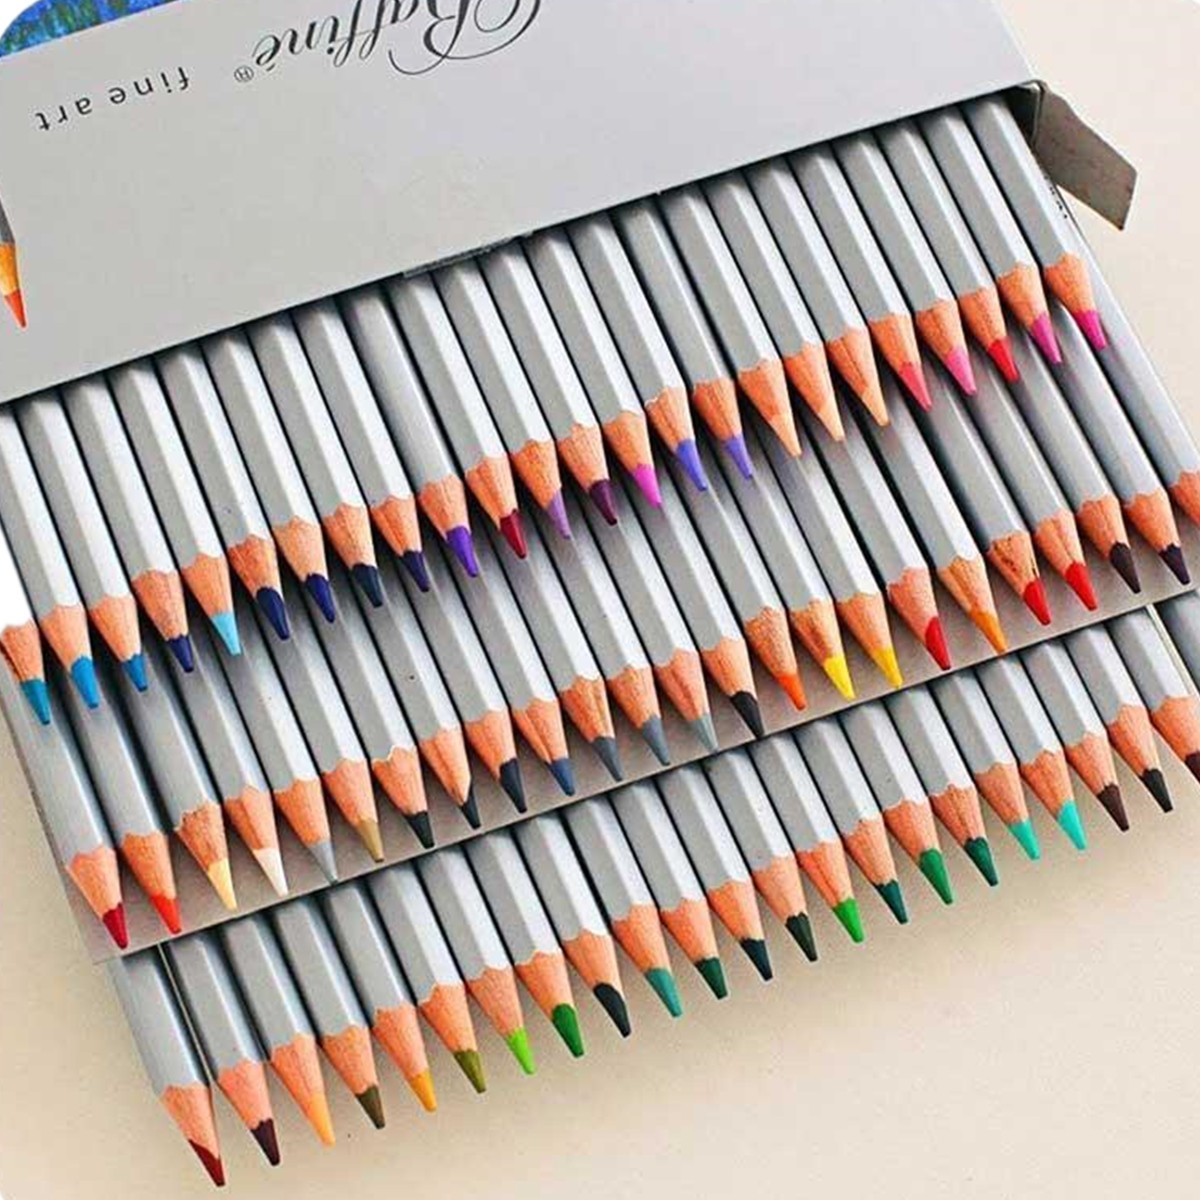 72-Colors-Art-Drawing-Pencil-Set-Oil-Non-toxic-Pencils-Painting-Sketching-Drawing-Stationery-School--973251-16